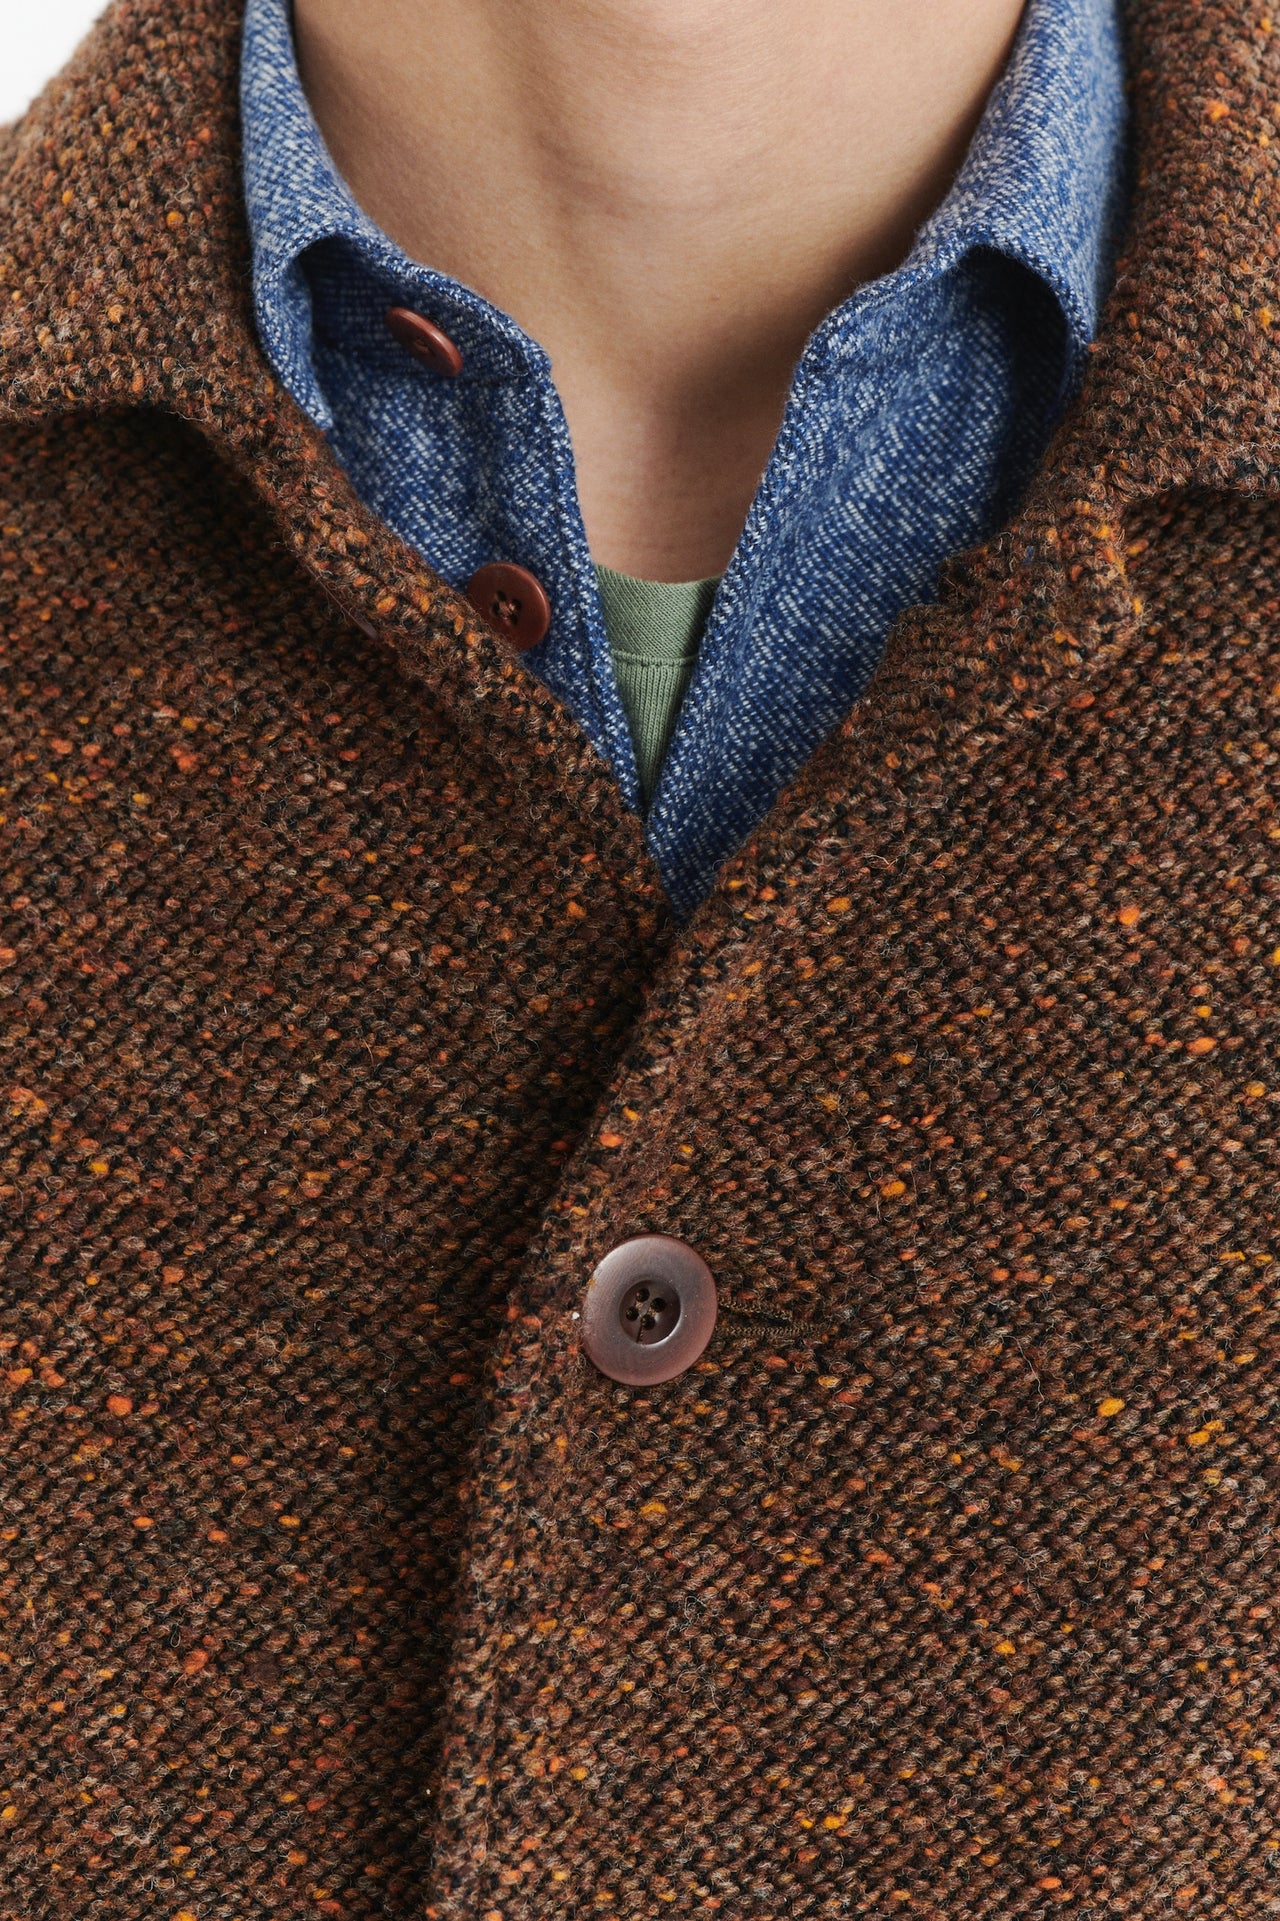 Winter Coat in a Brown and Orange Italian Virgin Wool with MEIDA Thermo Insulation